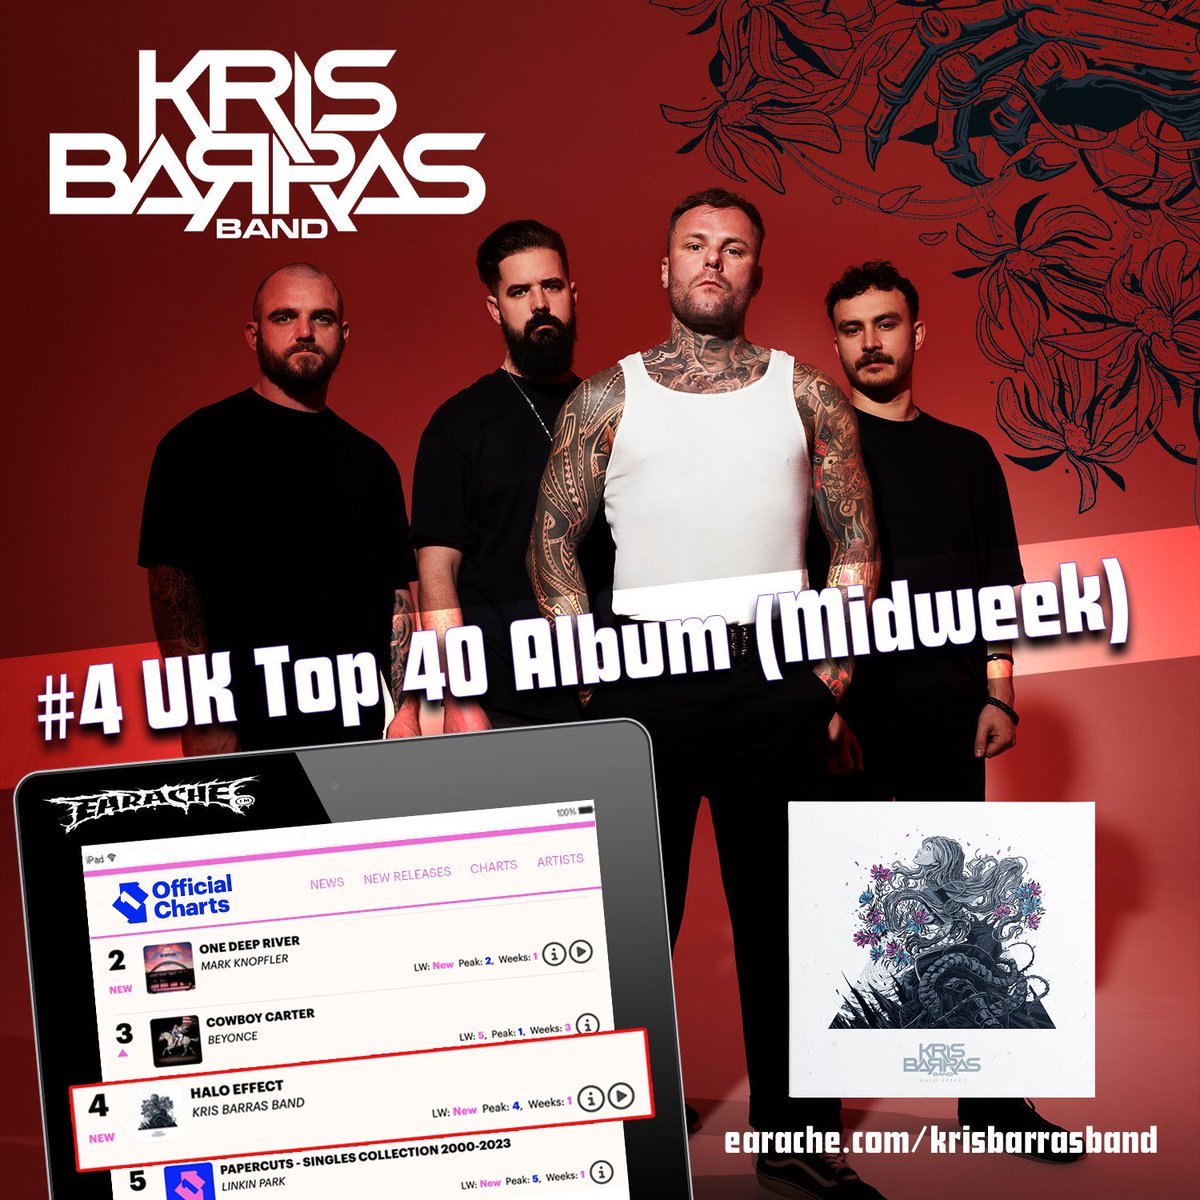 .@KrisBarrasBand’s new album ‘Halo Effect’ has entered the midweek UK album charts at number 4. The easiest way to support this campaign on release week is to download the album for as little as £4.99 from all major platforms linktr.ee/kbbdigital